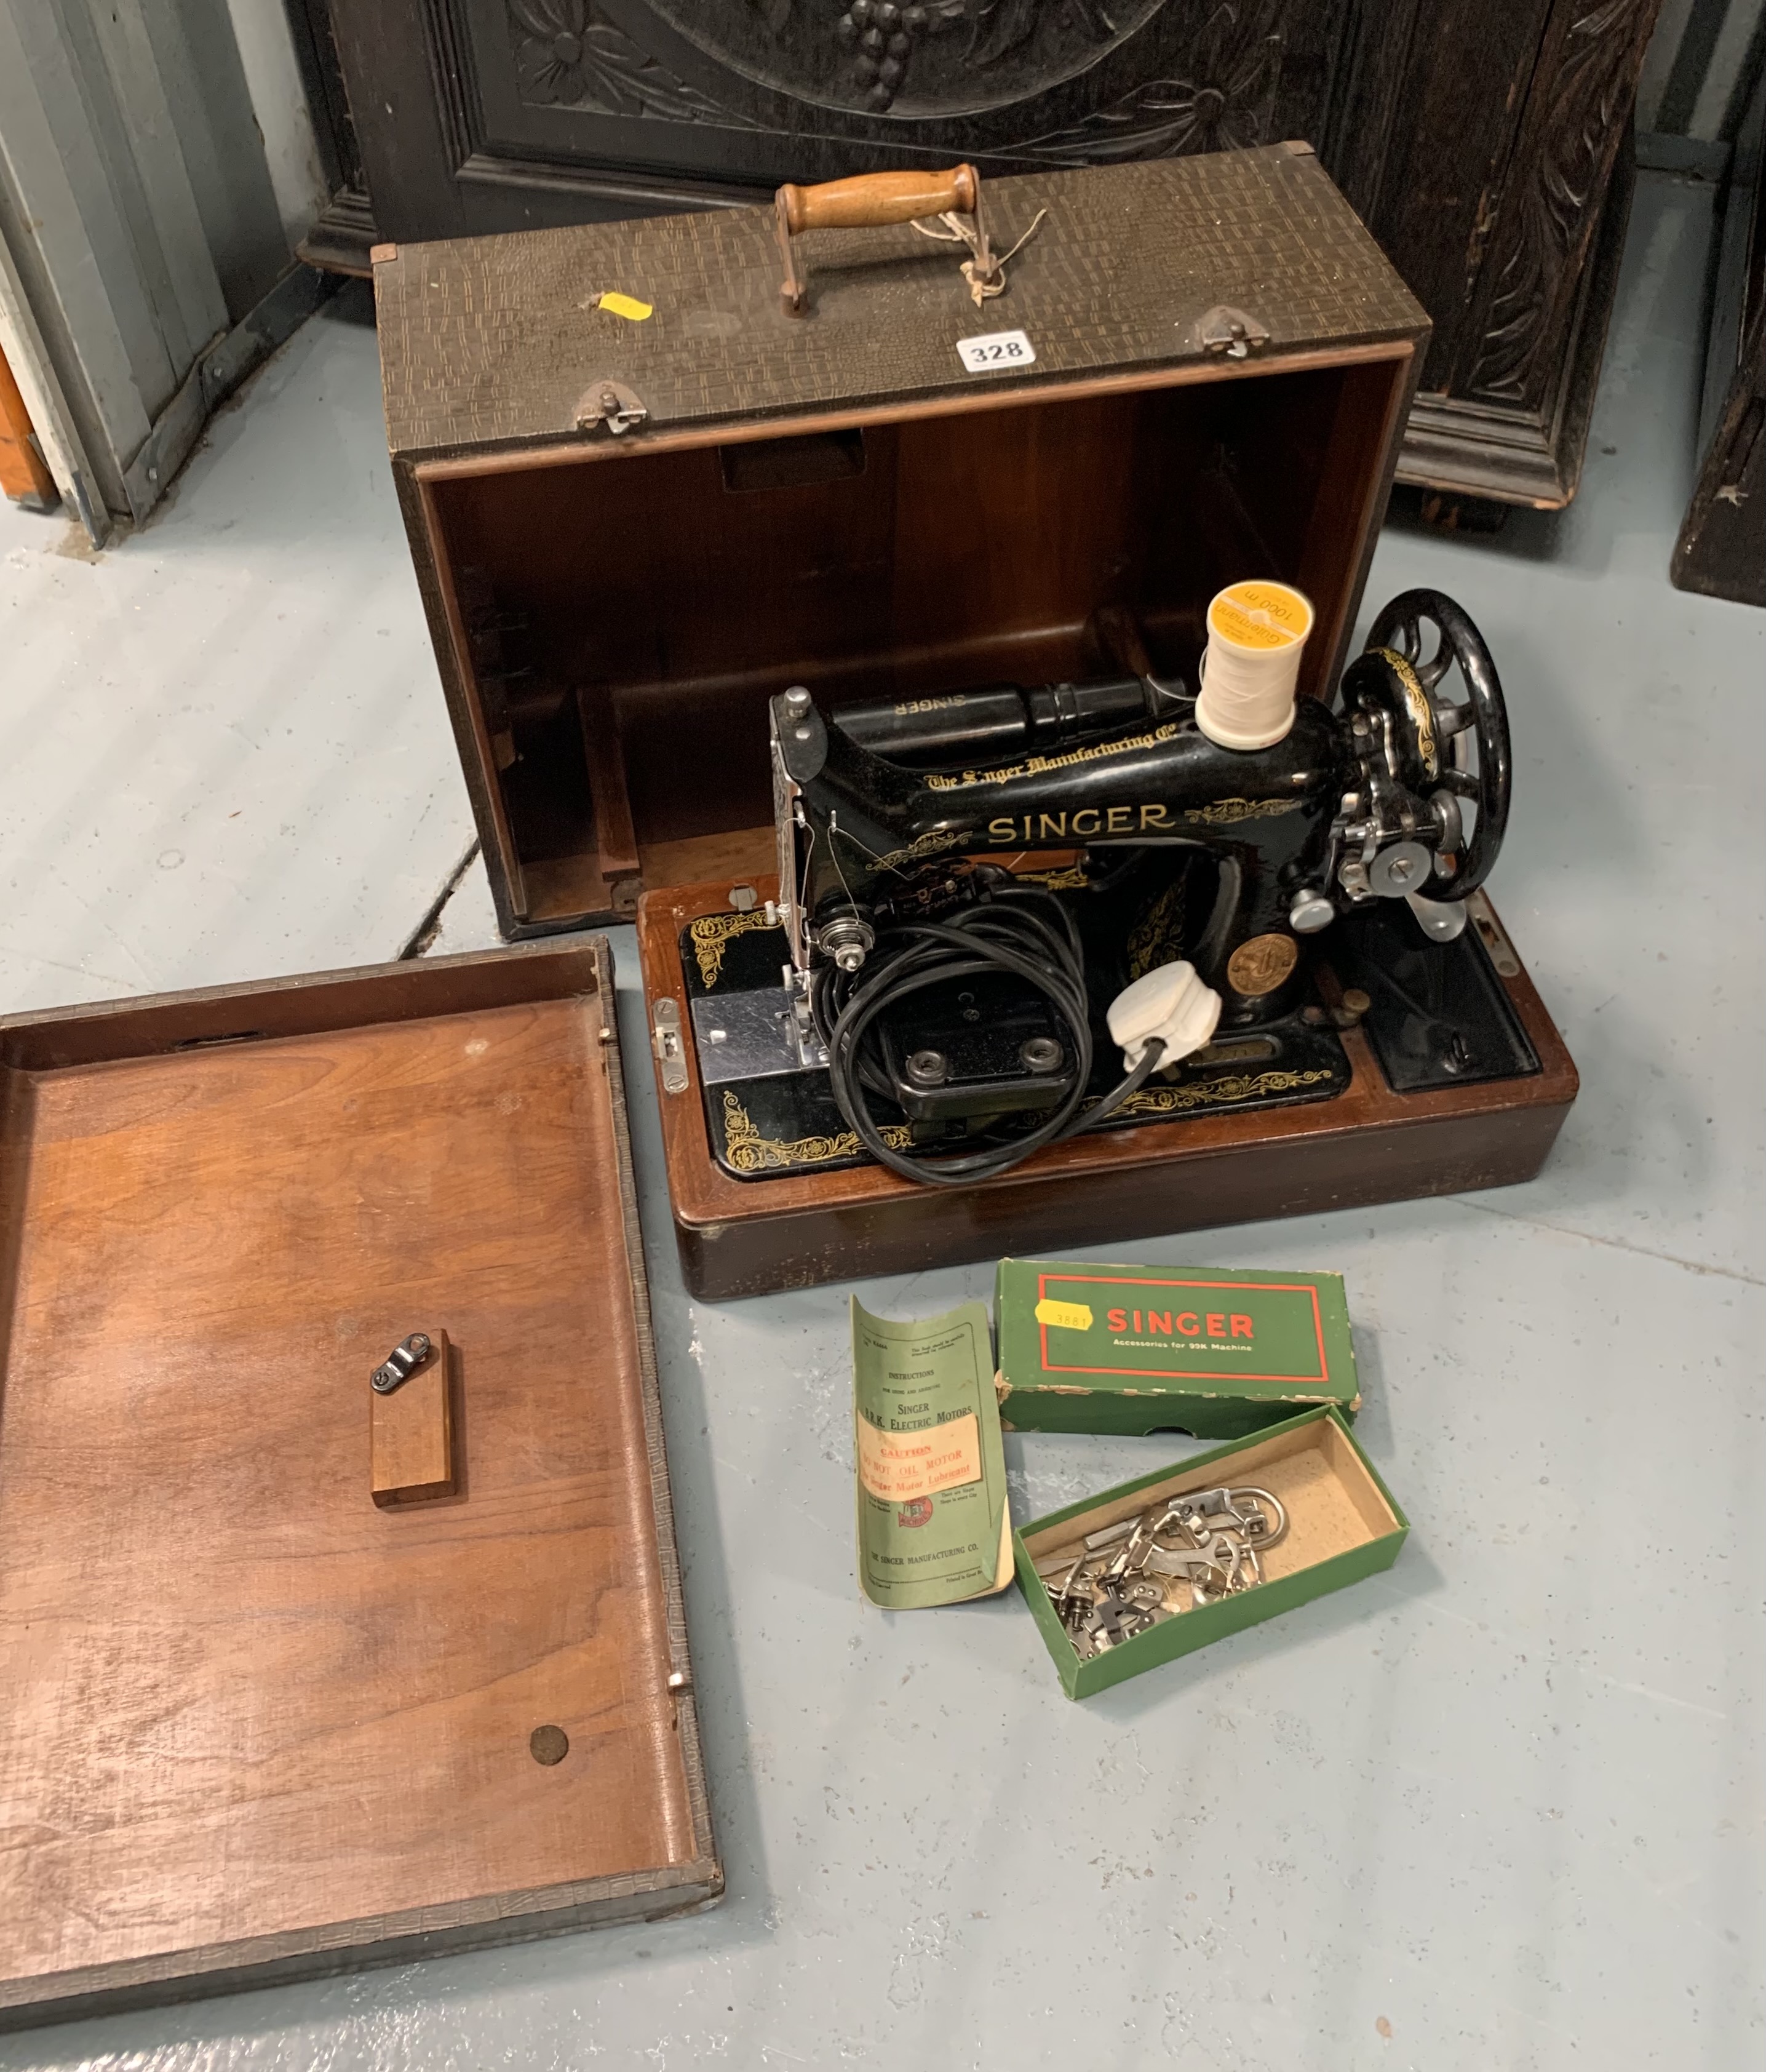 Singer sewing machine in case with accessories